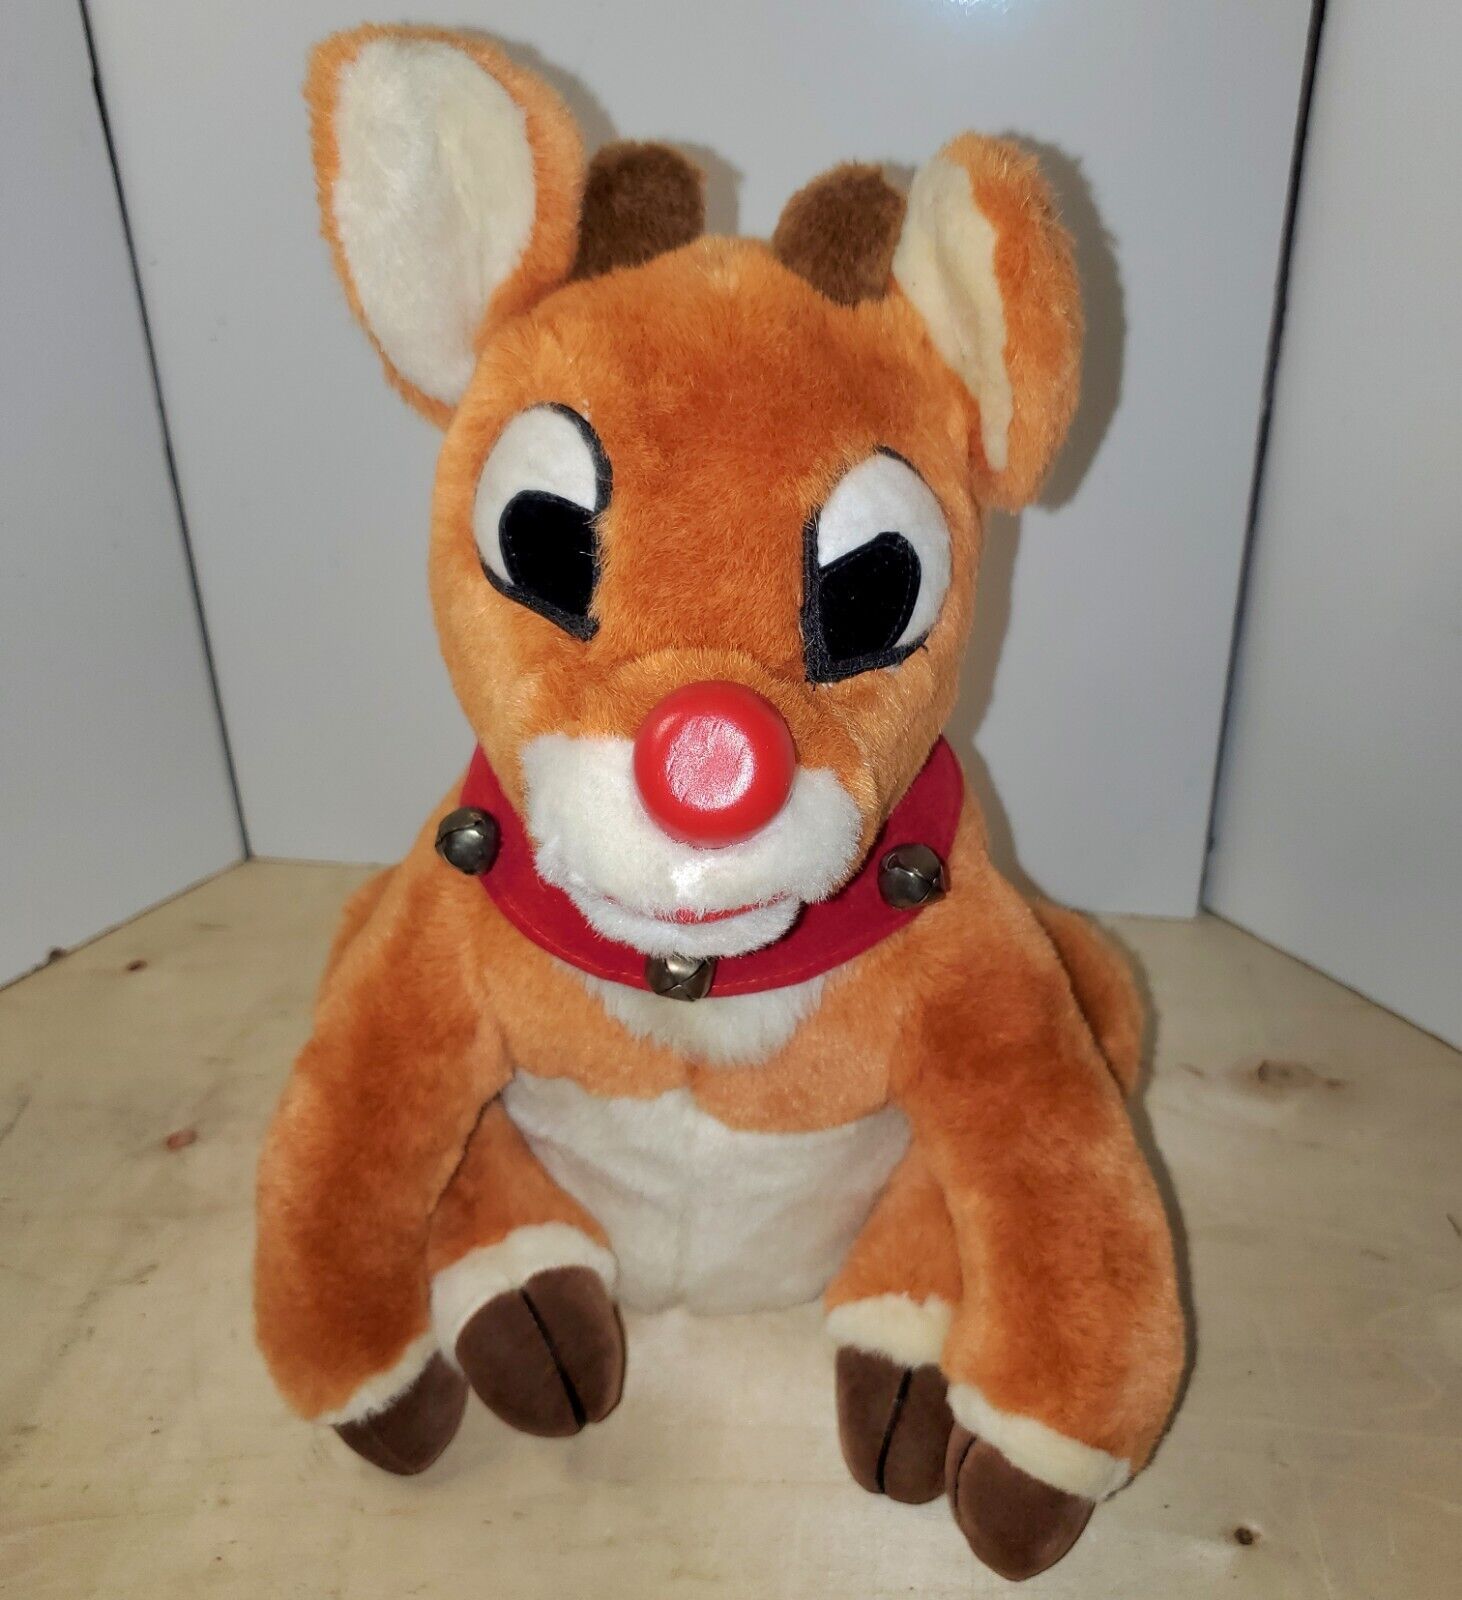 Gemmy Plush Rudolph The Red Nosed Reindeer Talking Singing Animated